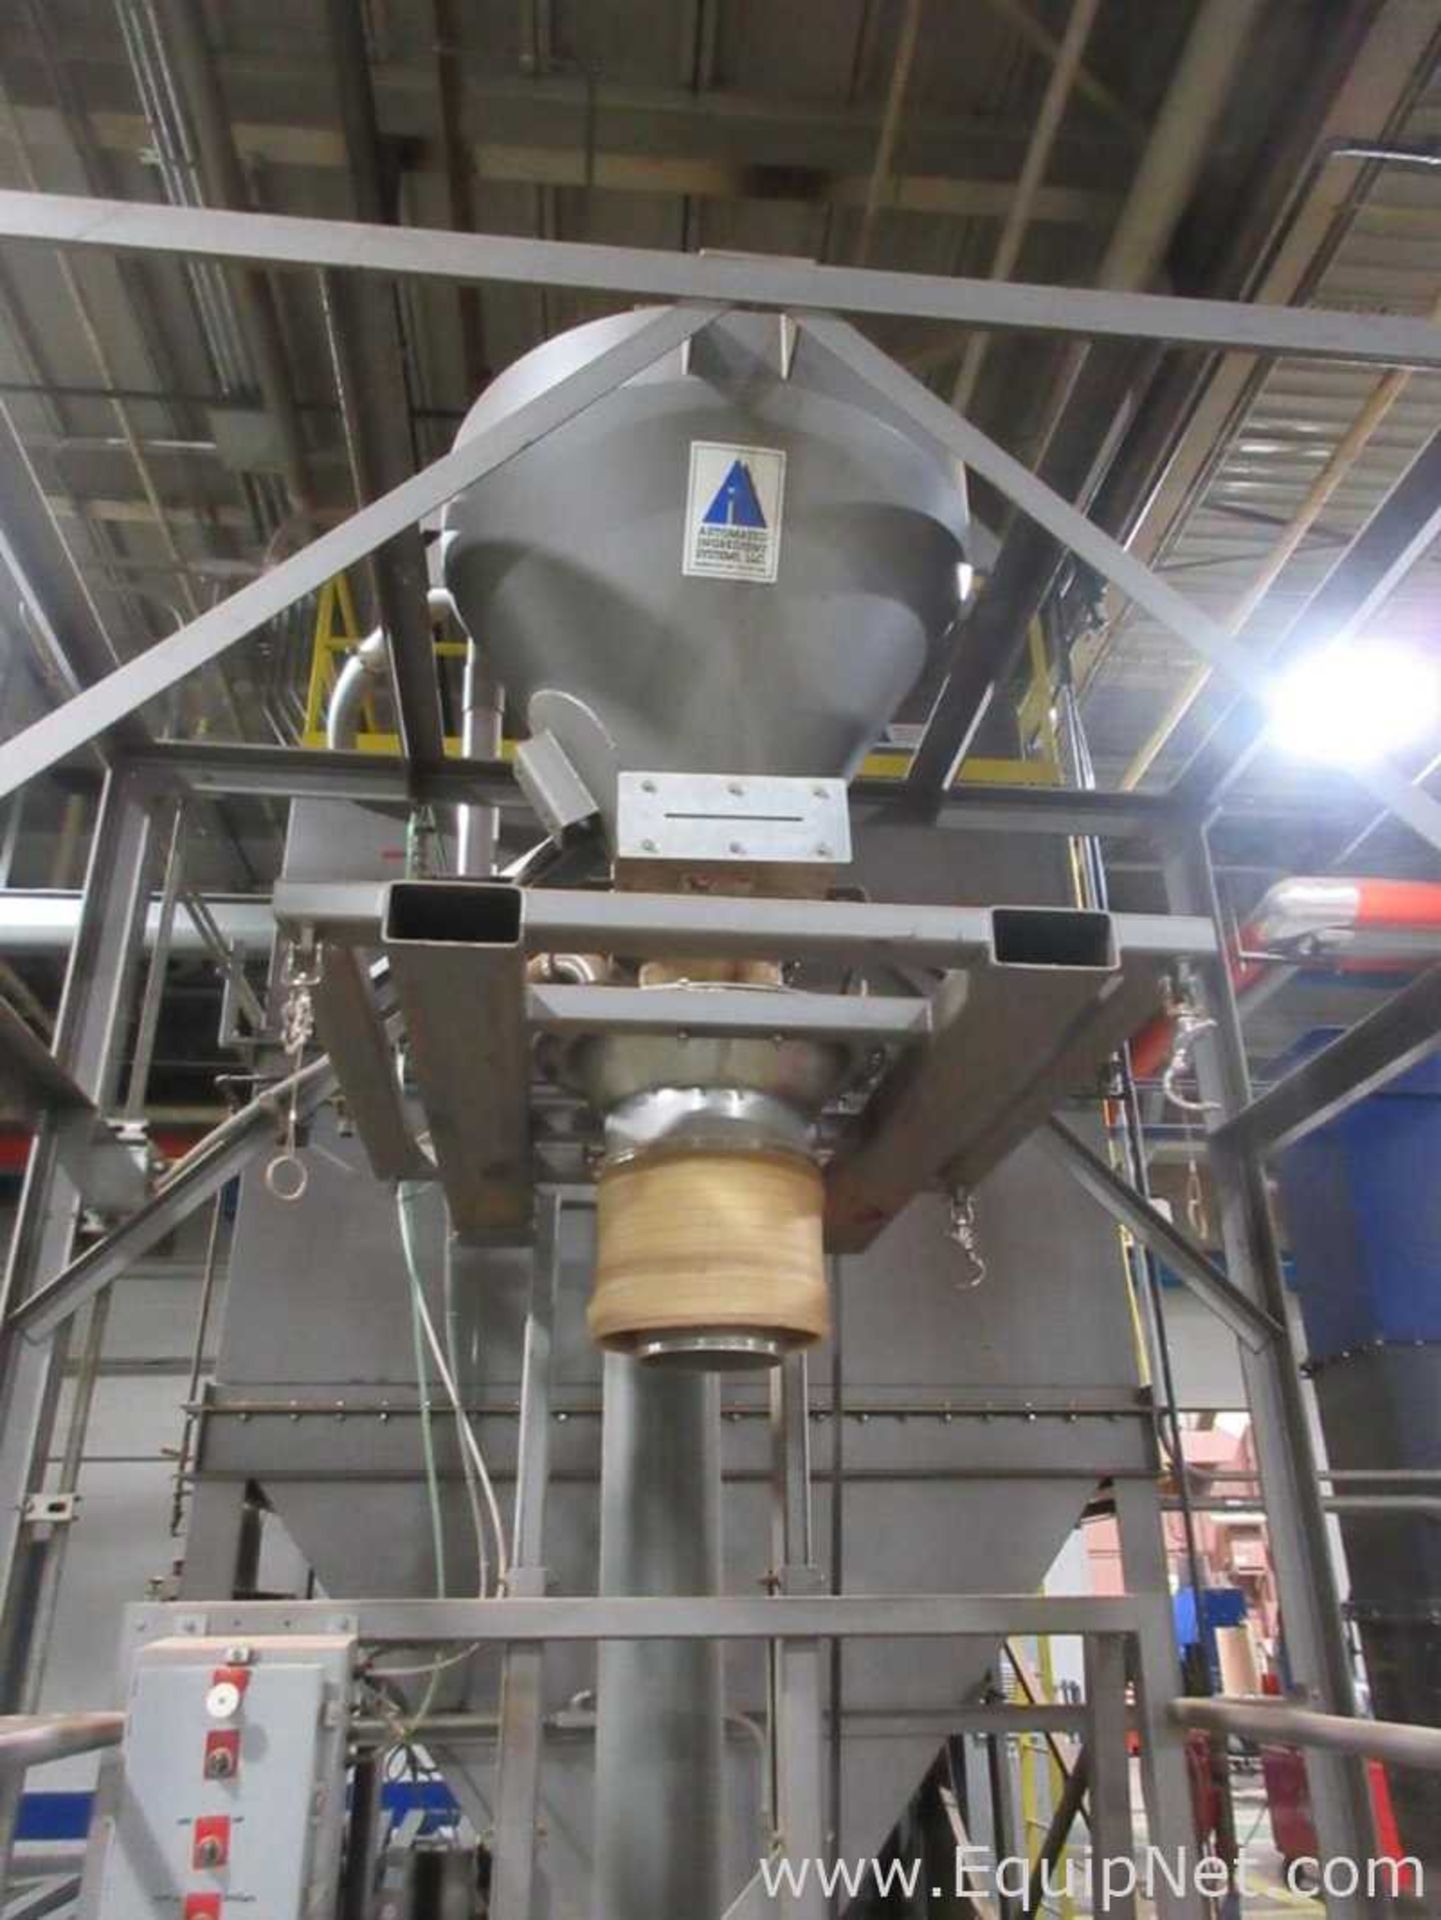 AIS Bag Supersack Filler With Large Bin - Image 40 of 43